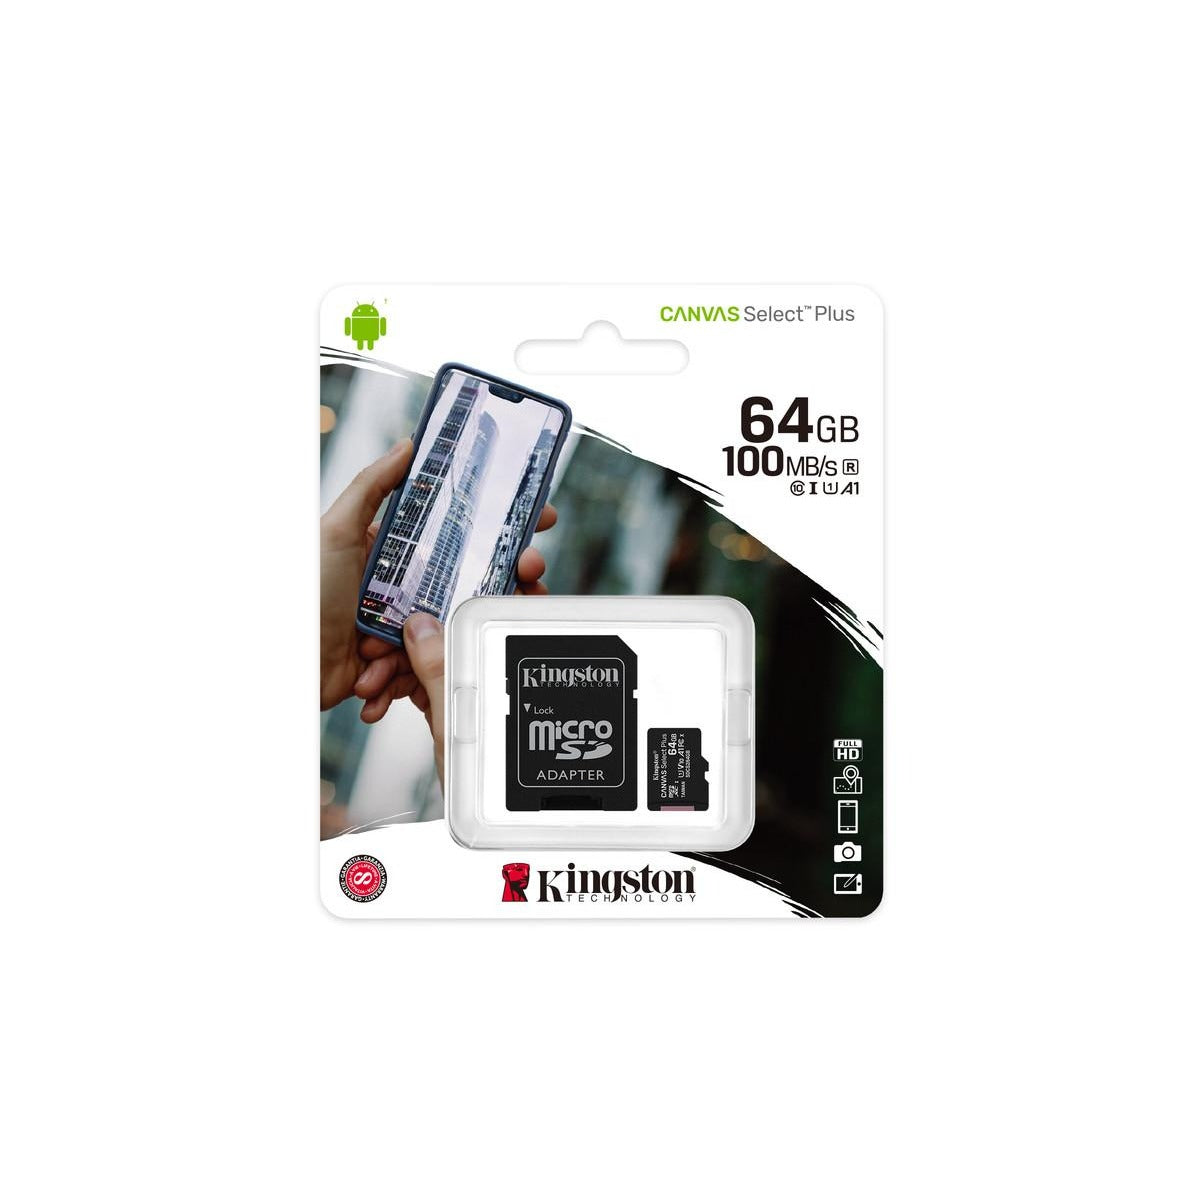 Kingston - Canvas Select Plus - 64GB - Continental Food Store